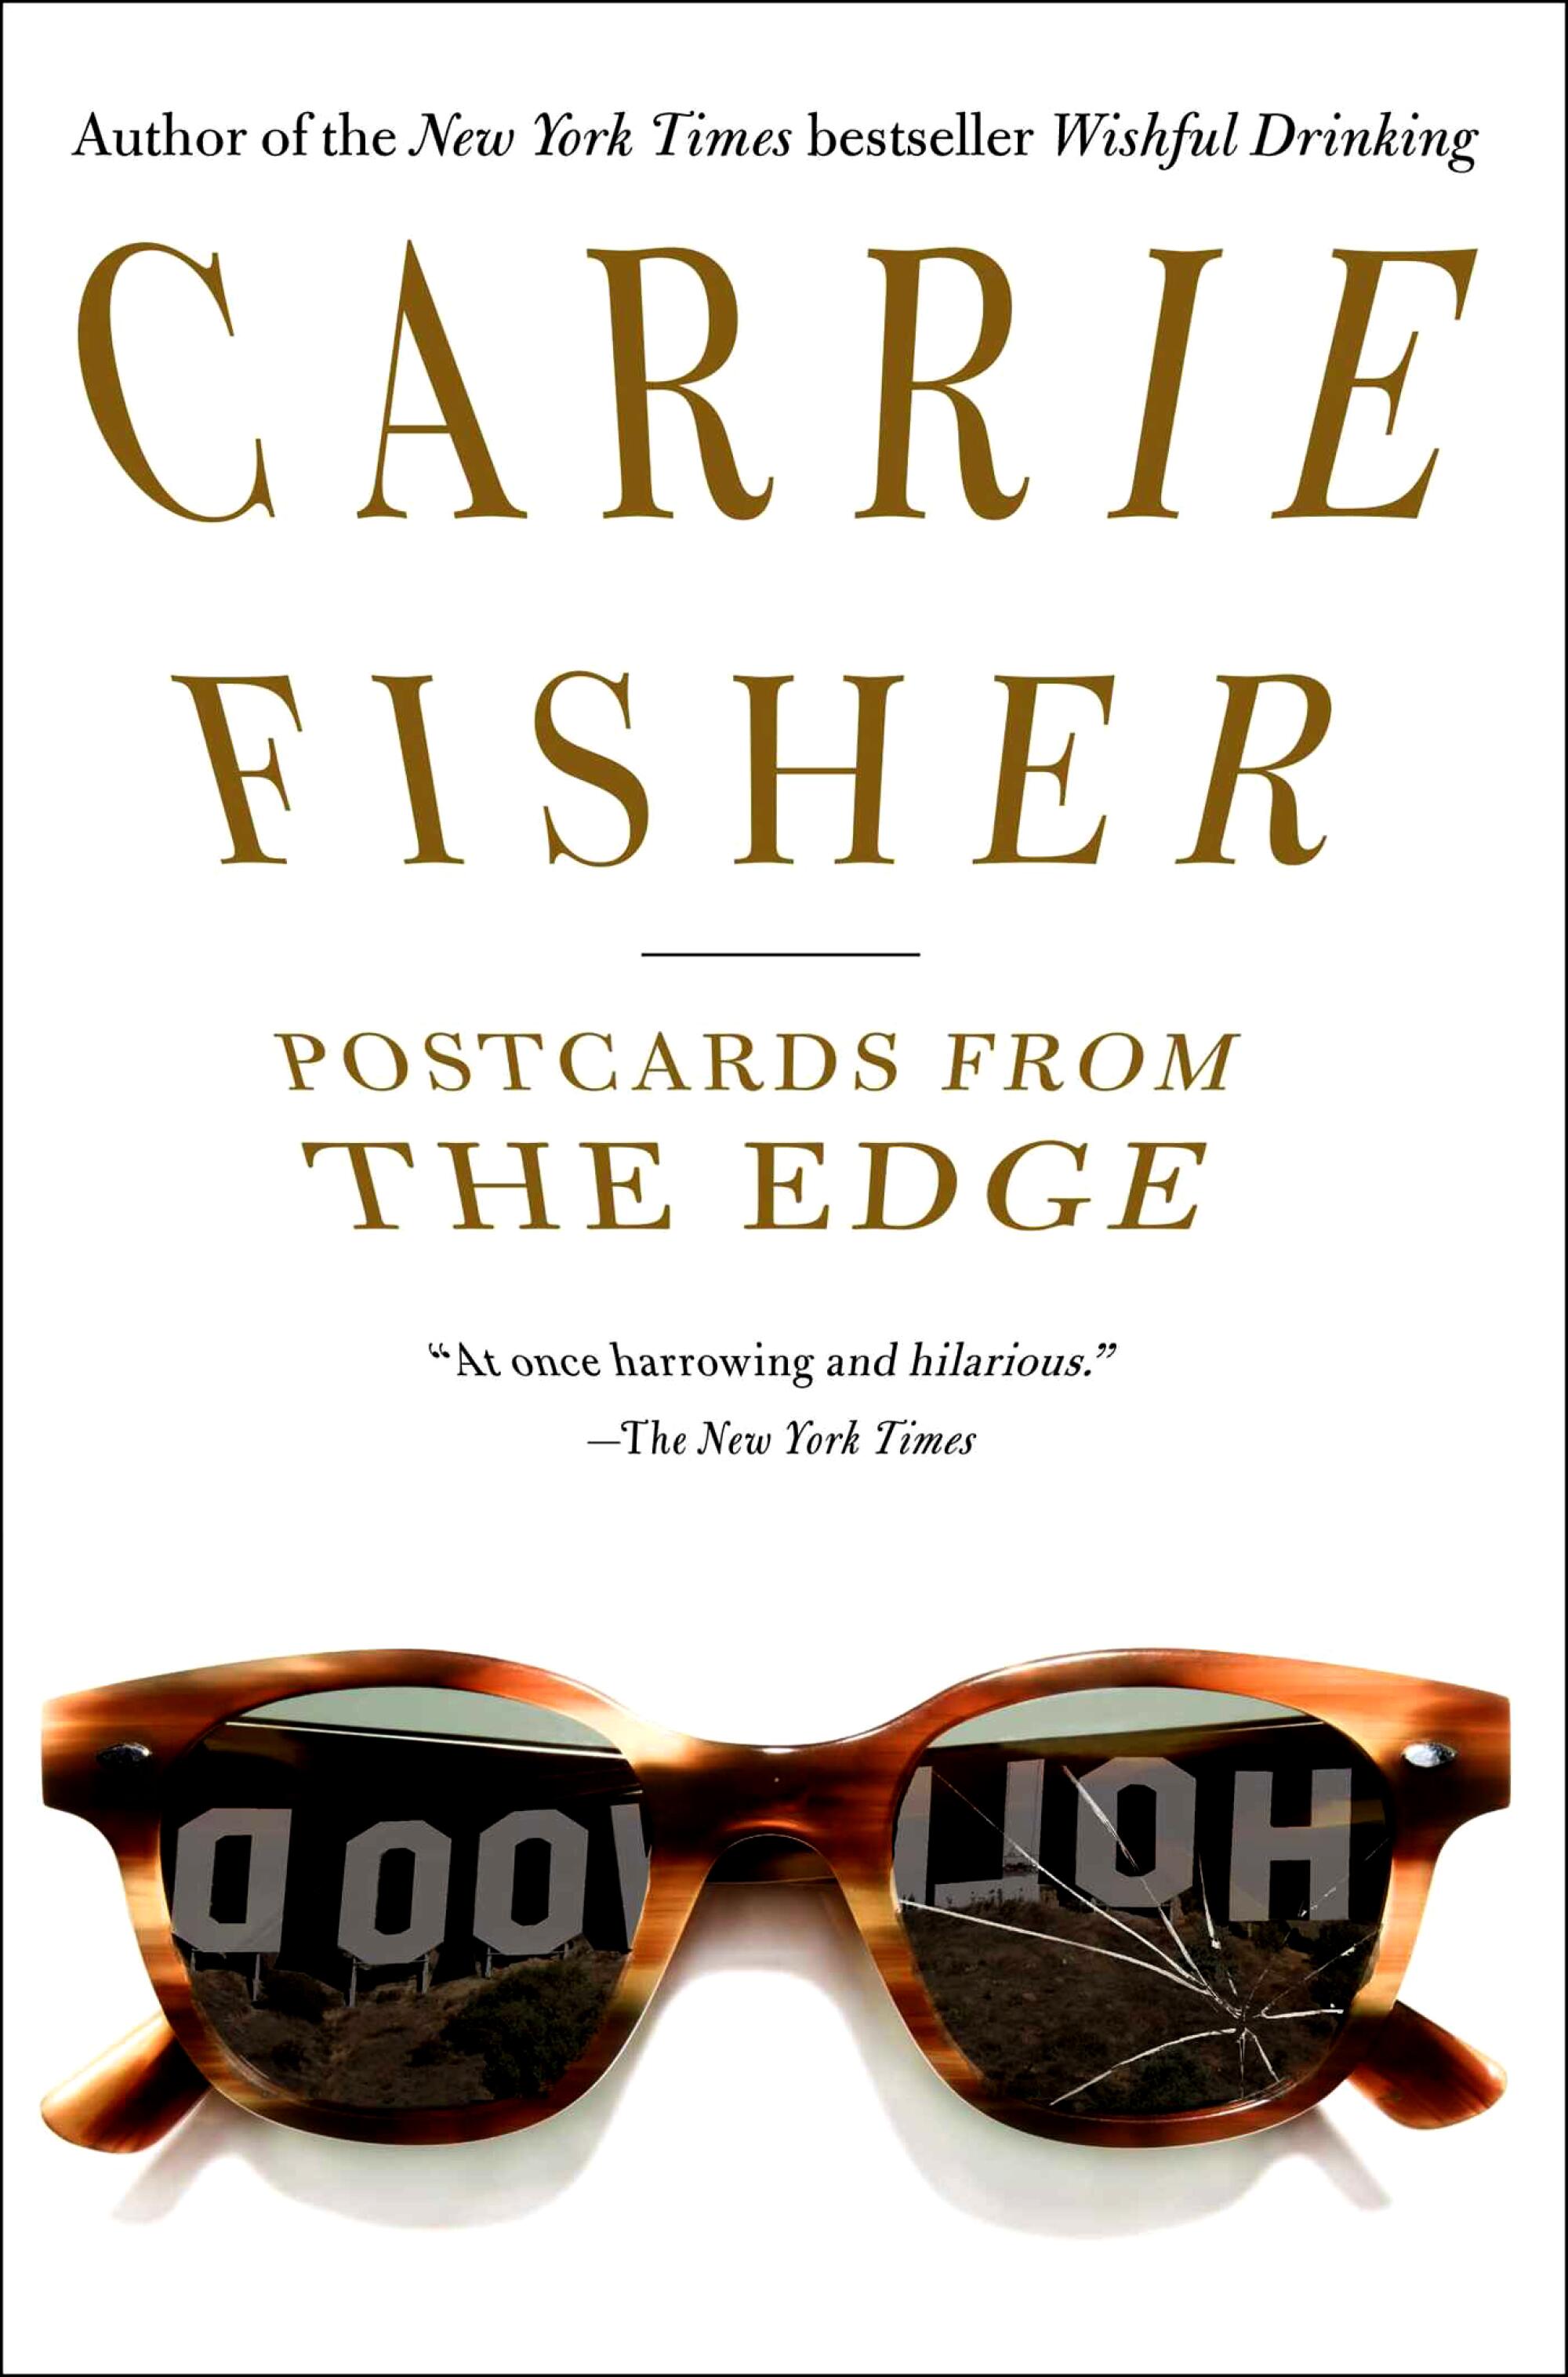 "Postcards From the Edge" by Carrie Fisher